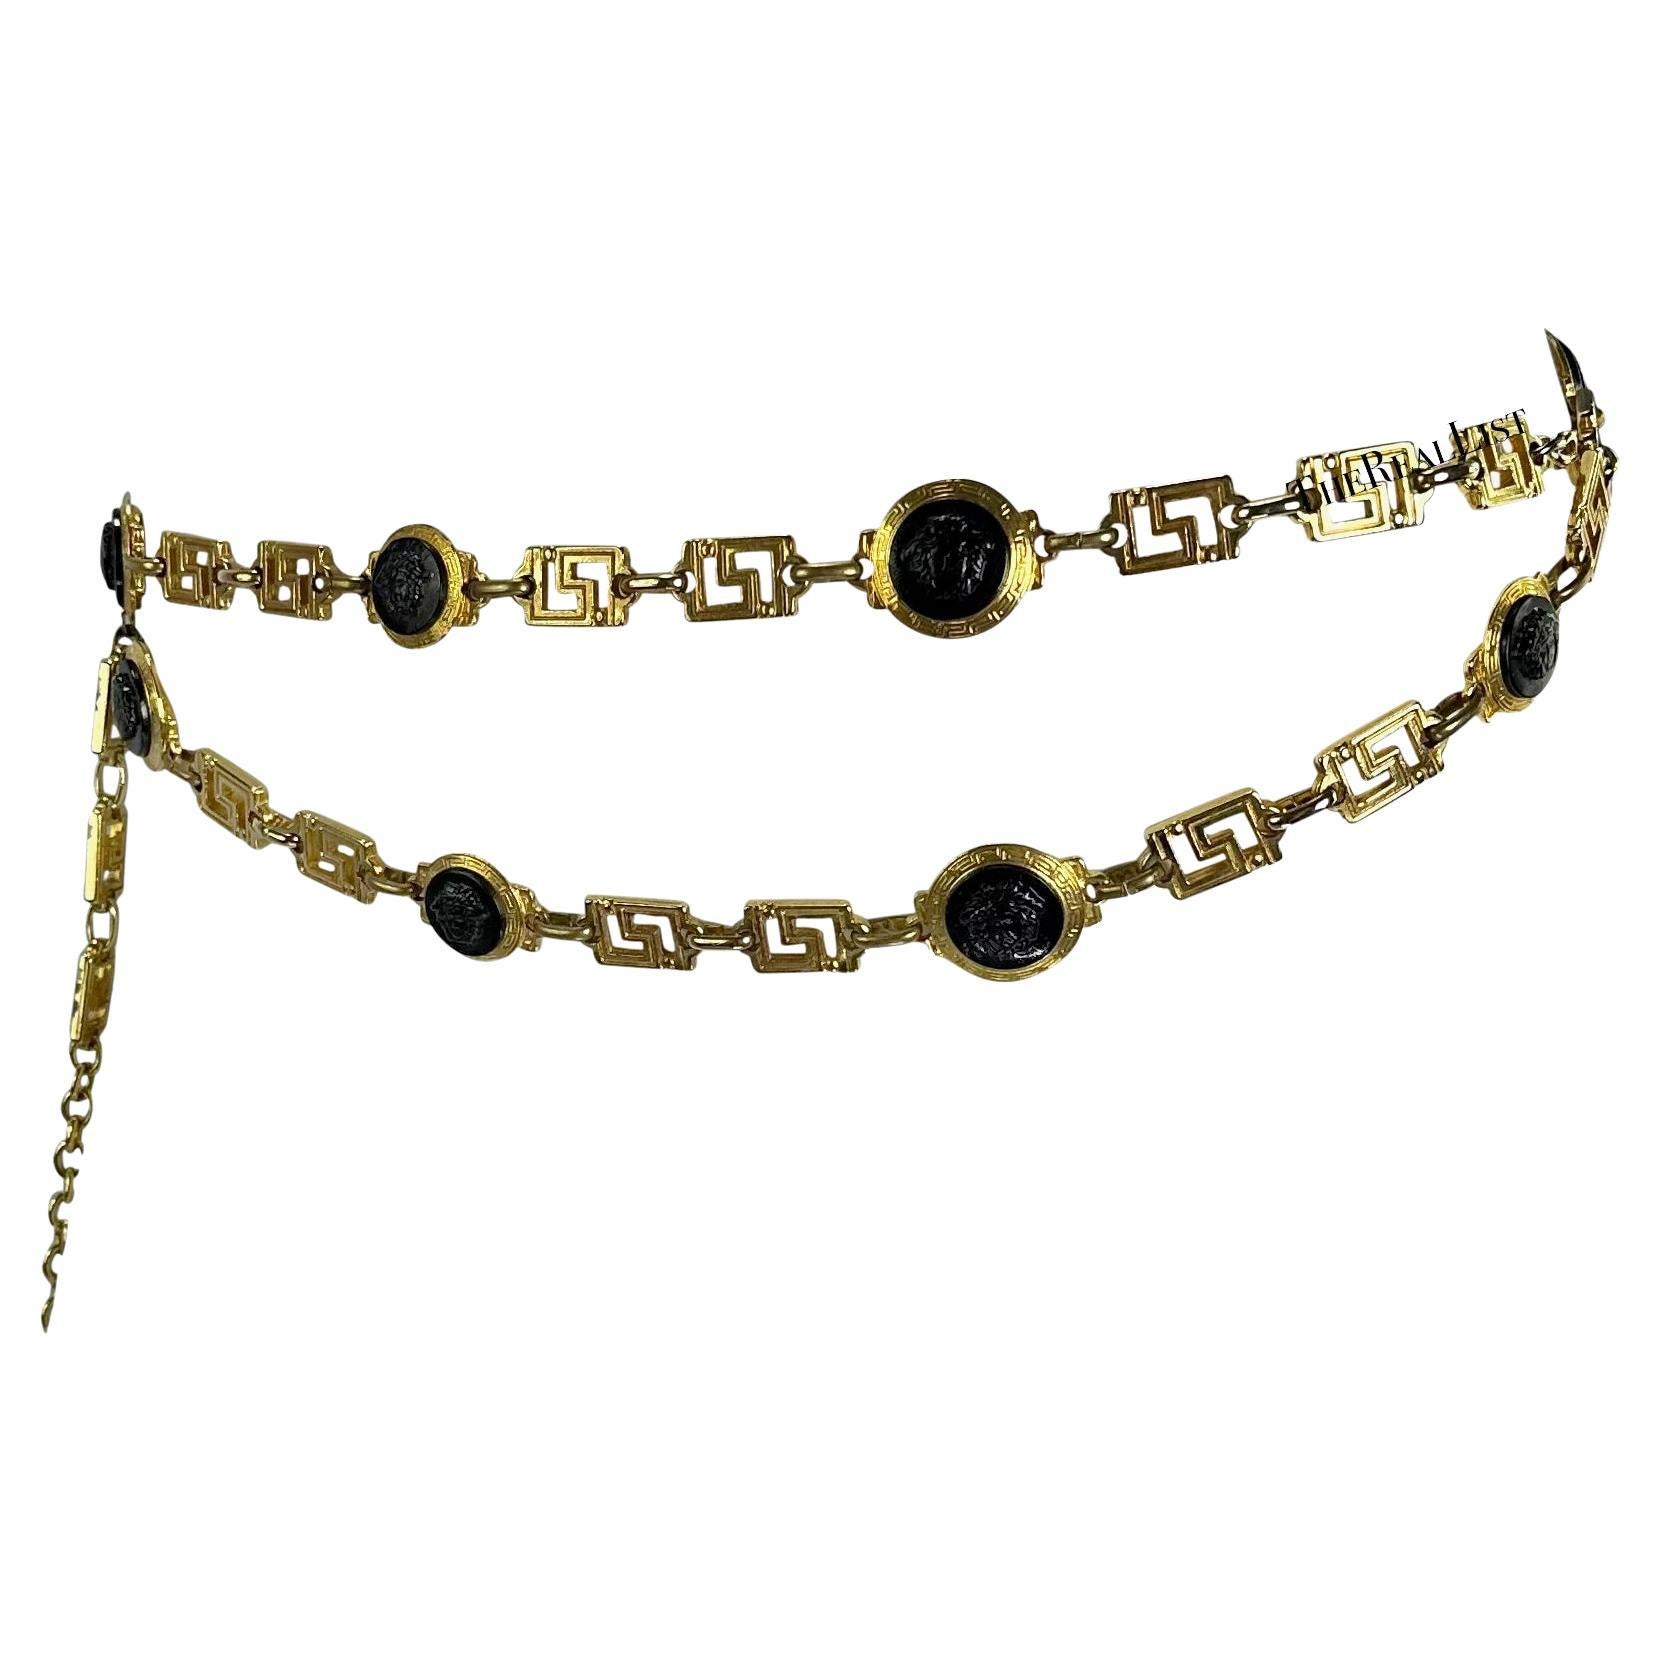 Presenting a beautiful gold-tone Gianni Versace chain link belt, designed by Gianni Versace. From the 1990s, this incredible belt features a Greek key link broken up black Versace Medusa reliefs with a double layer chain at the front, this chic belt